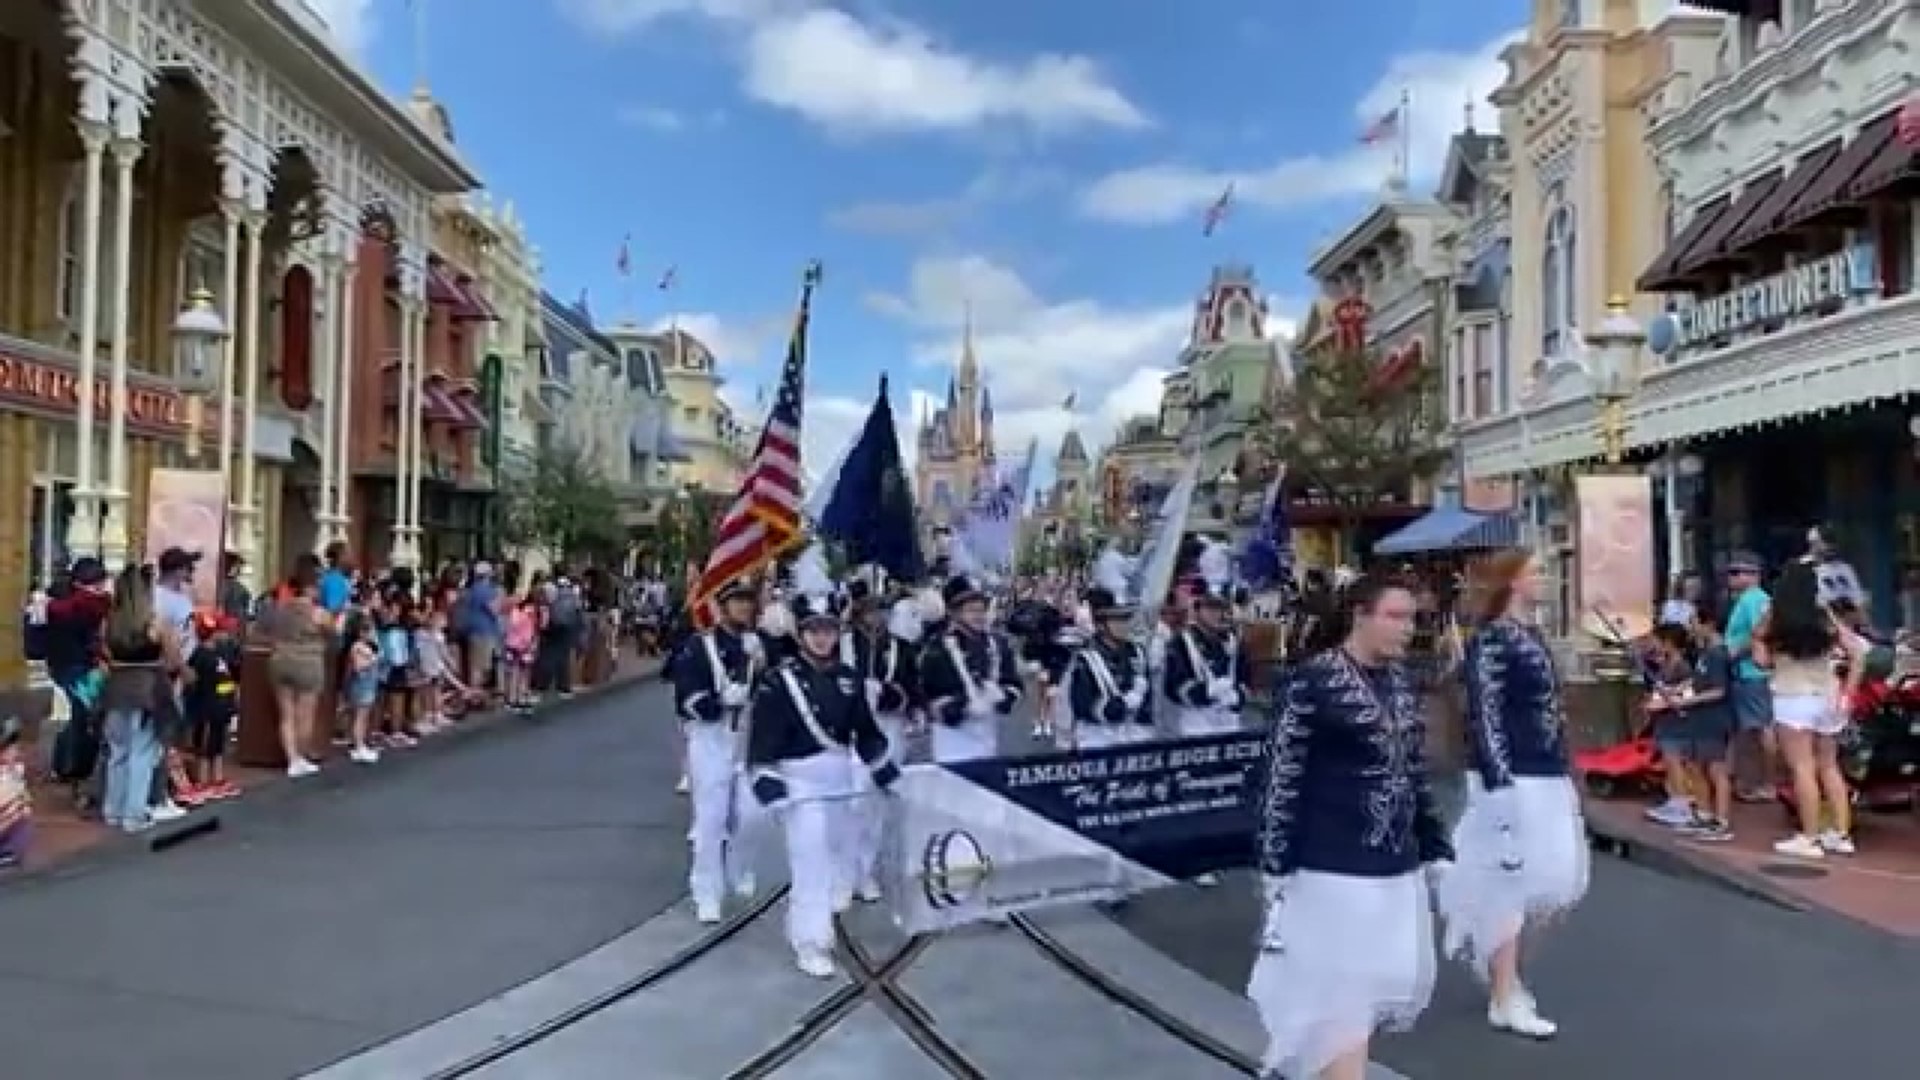 The 164 members of the band marched down Disney's Main Street USA.